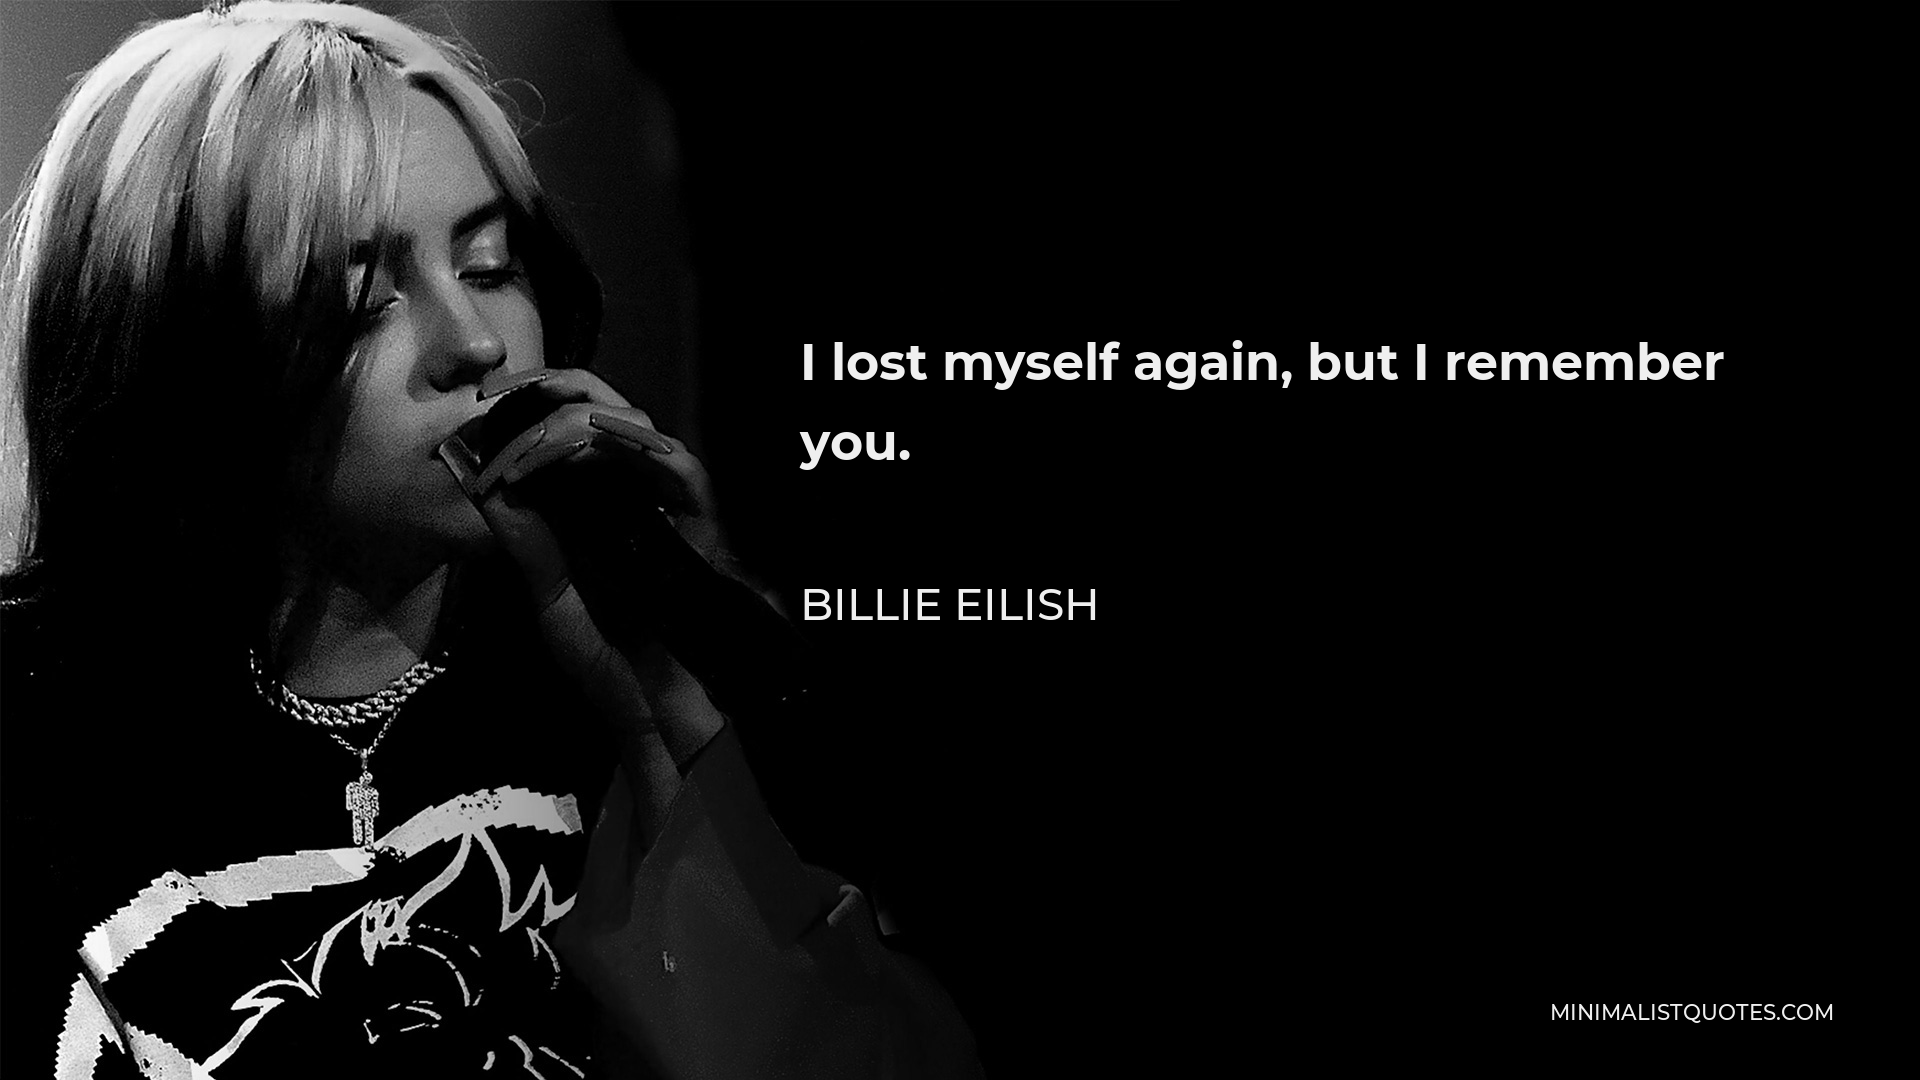 Billie Eilish Quote - I lost myself again, but I remember you.